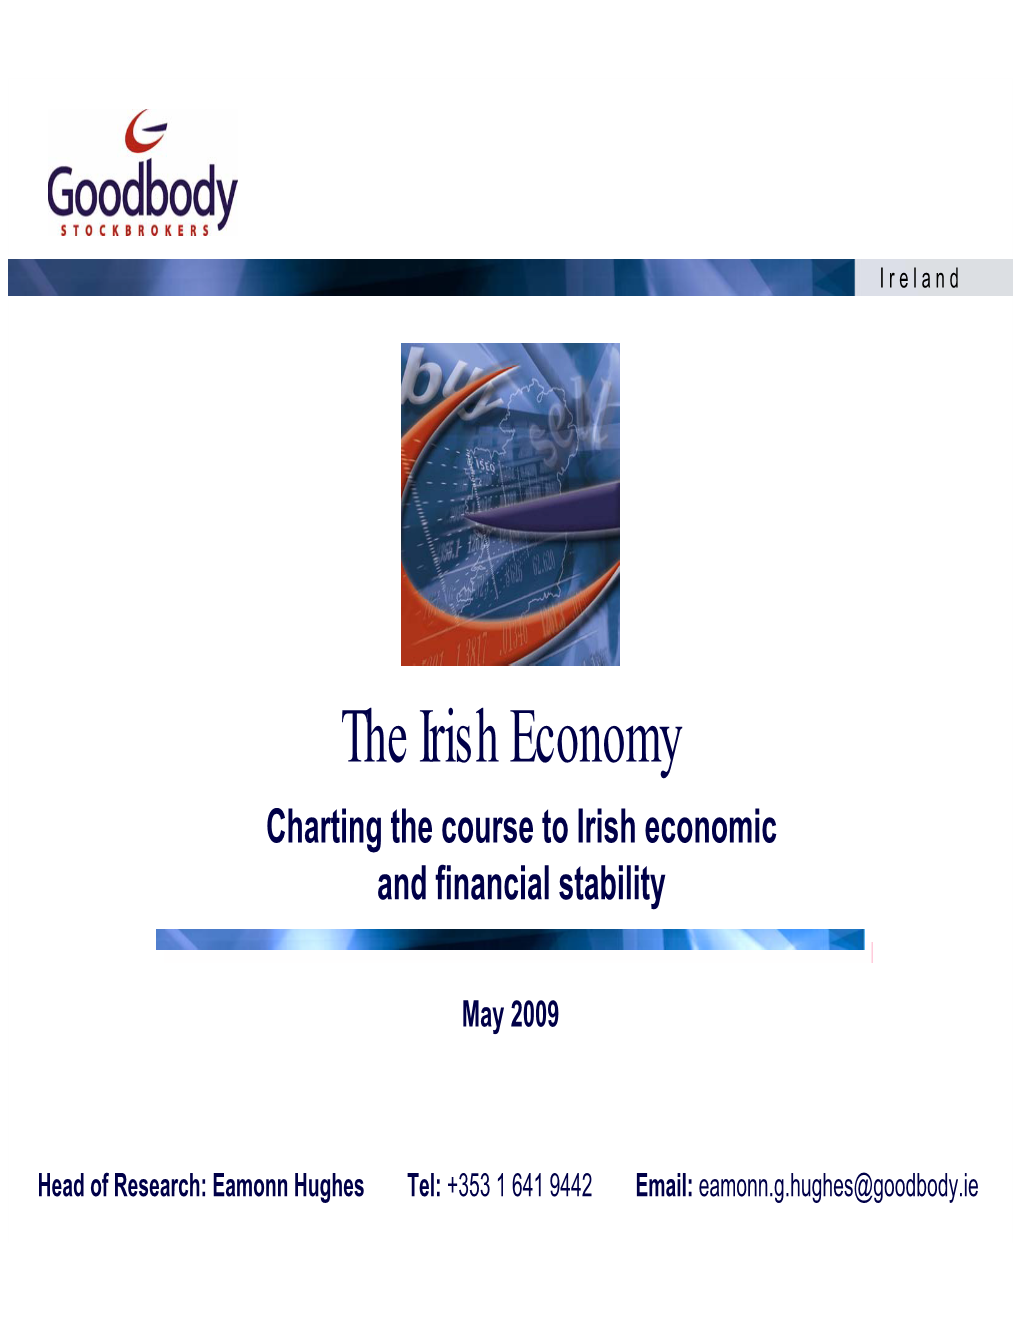 The Irish Economy Charting the Course to Irish Economic and Financial Stability